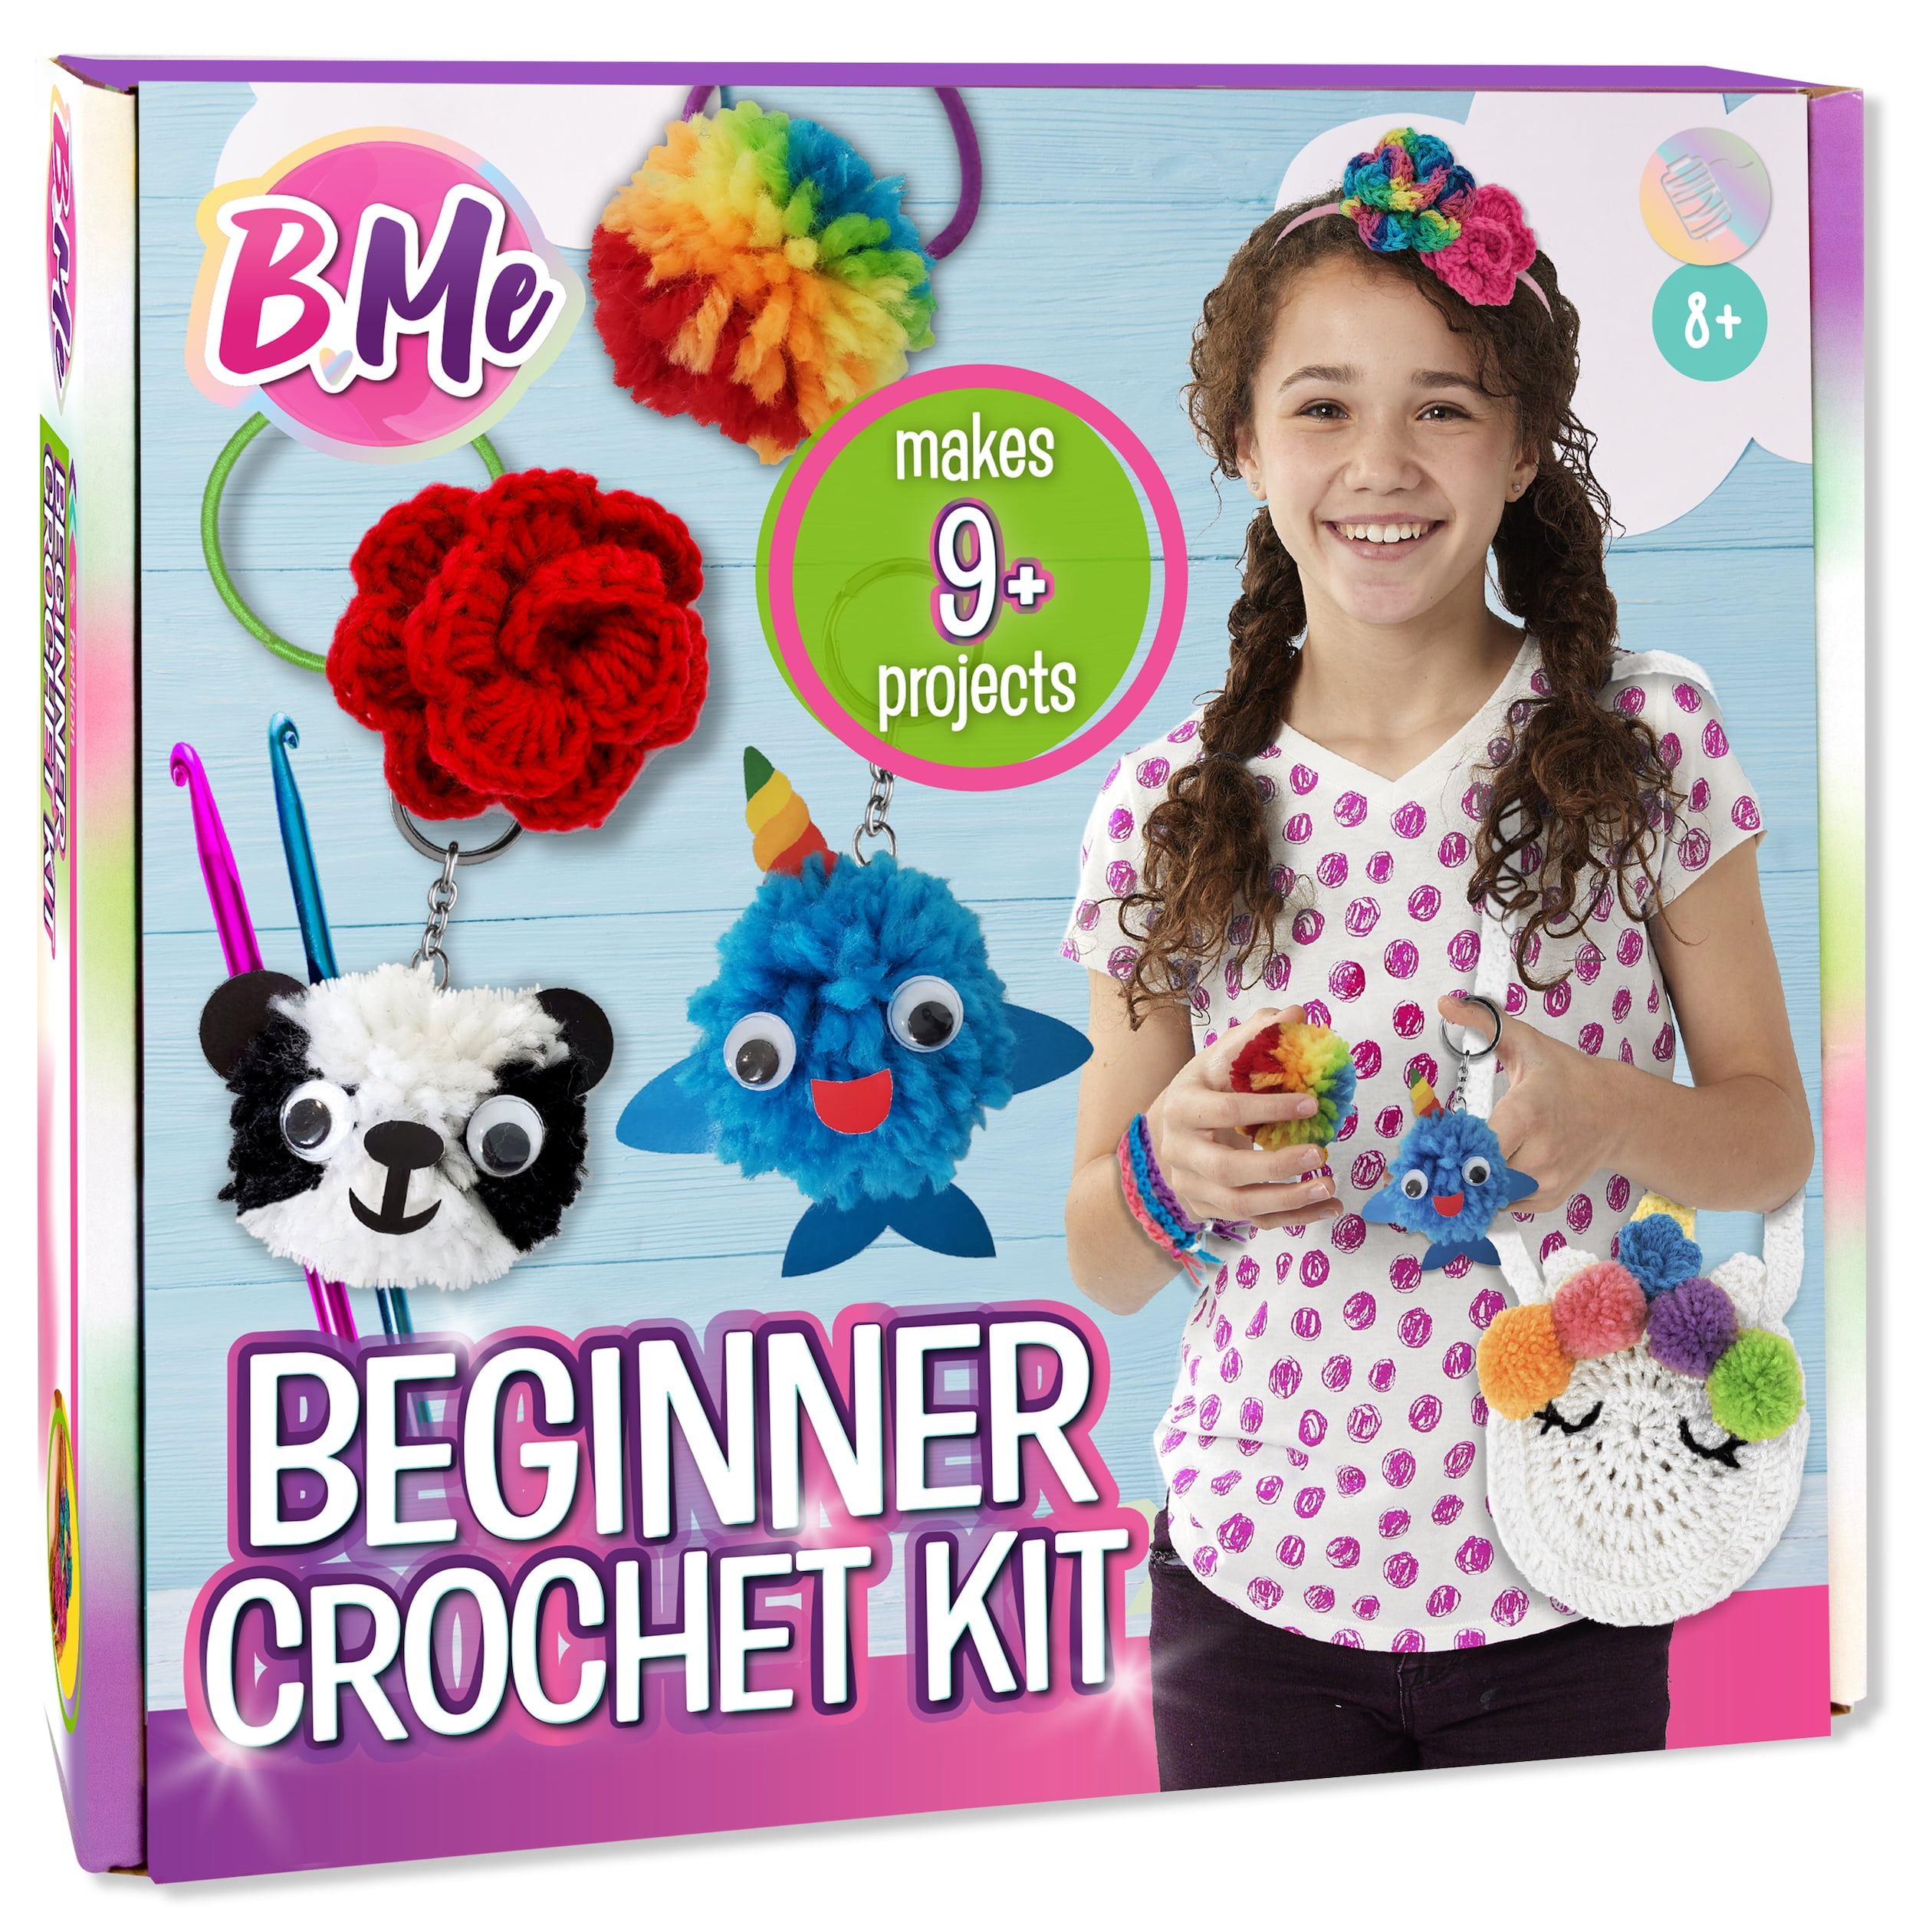 Easy Knitting, Crochet & Weaving Kits for Beginners Tagged baby